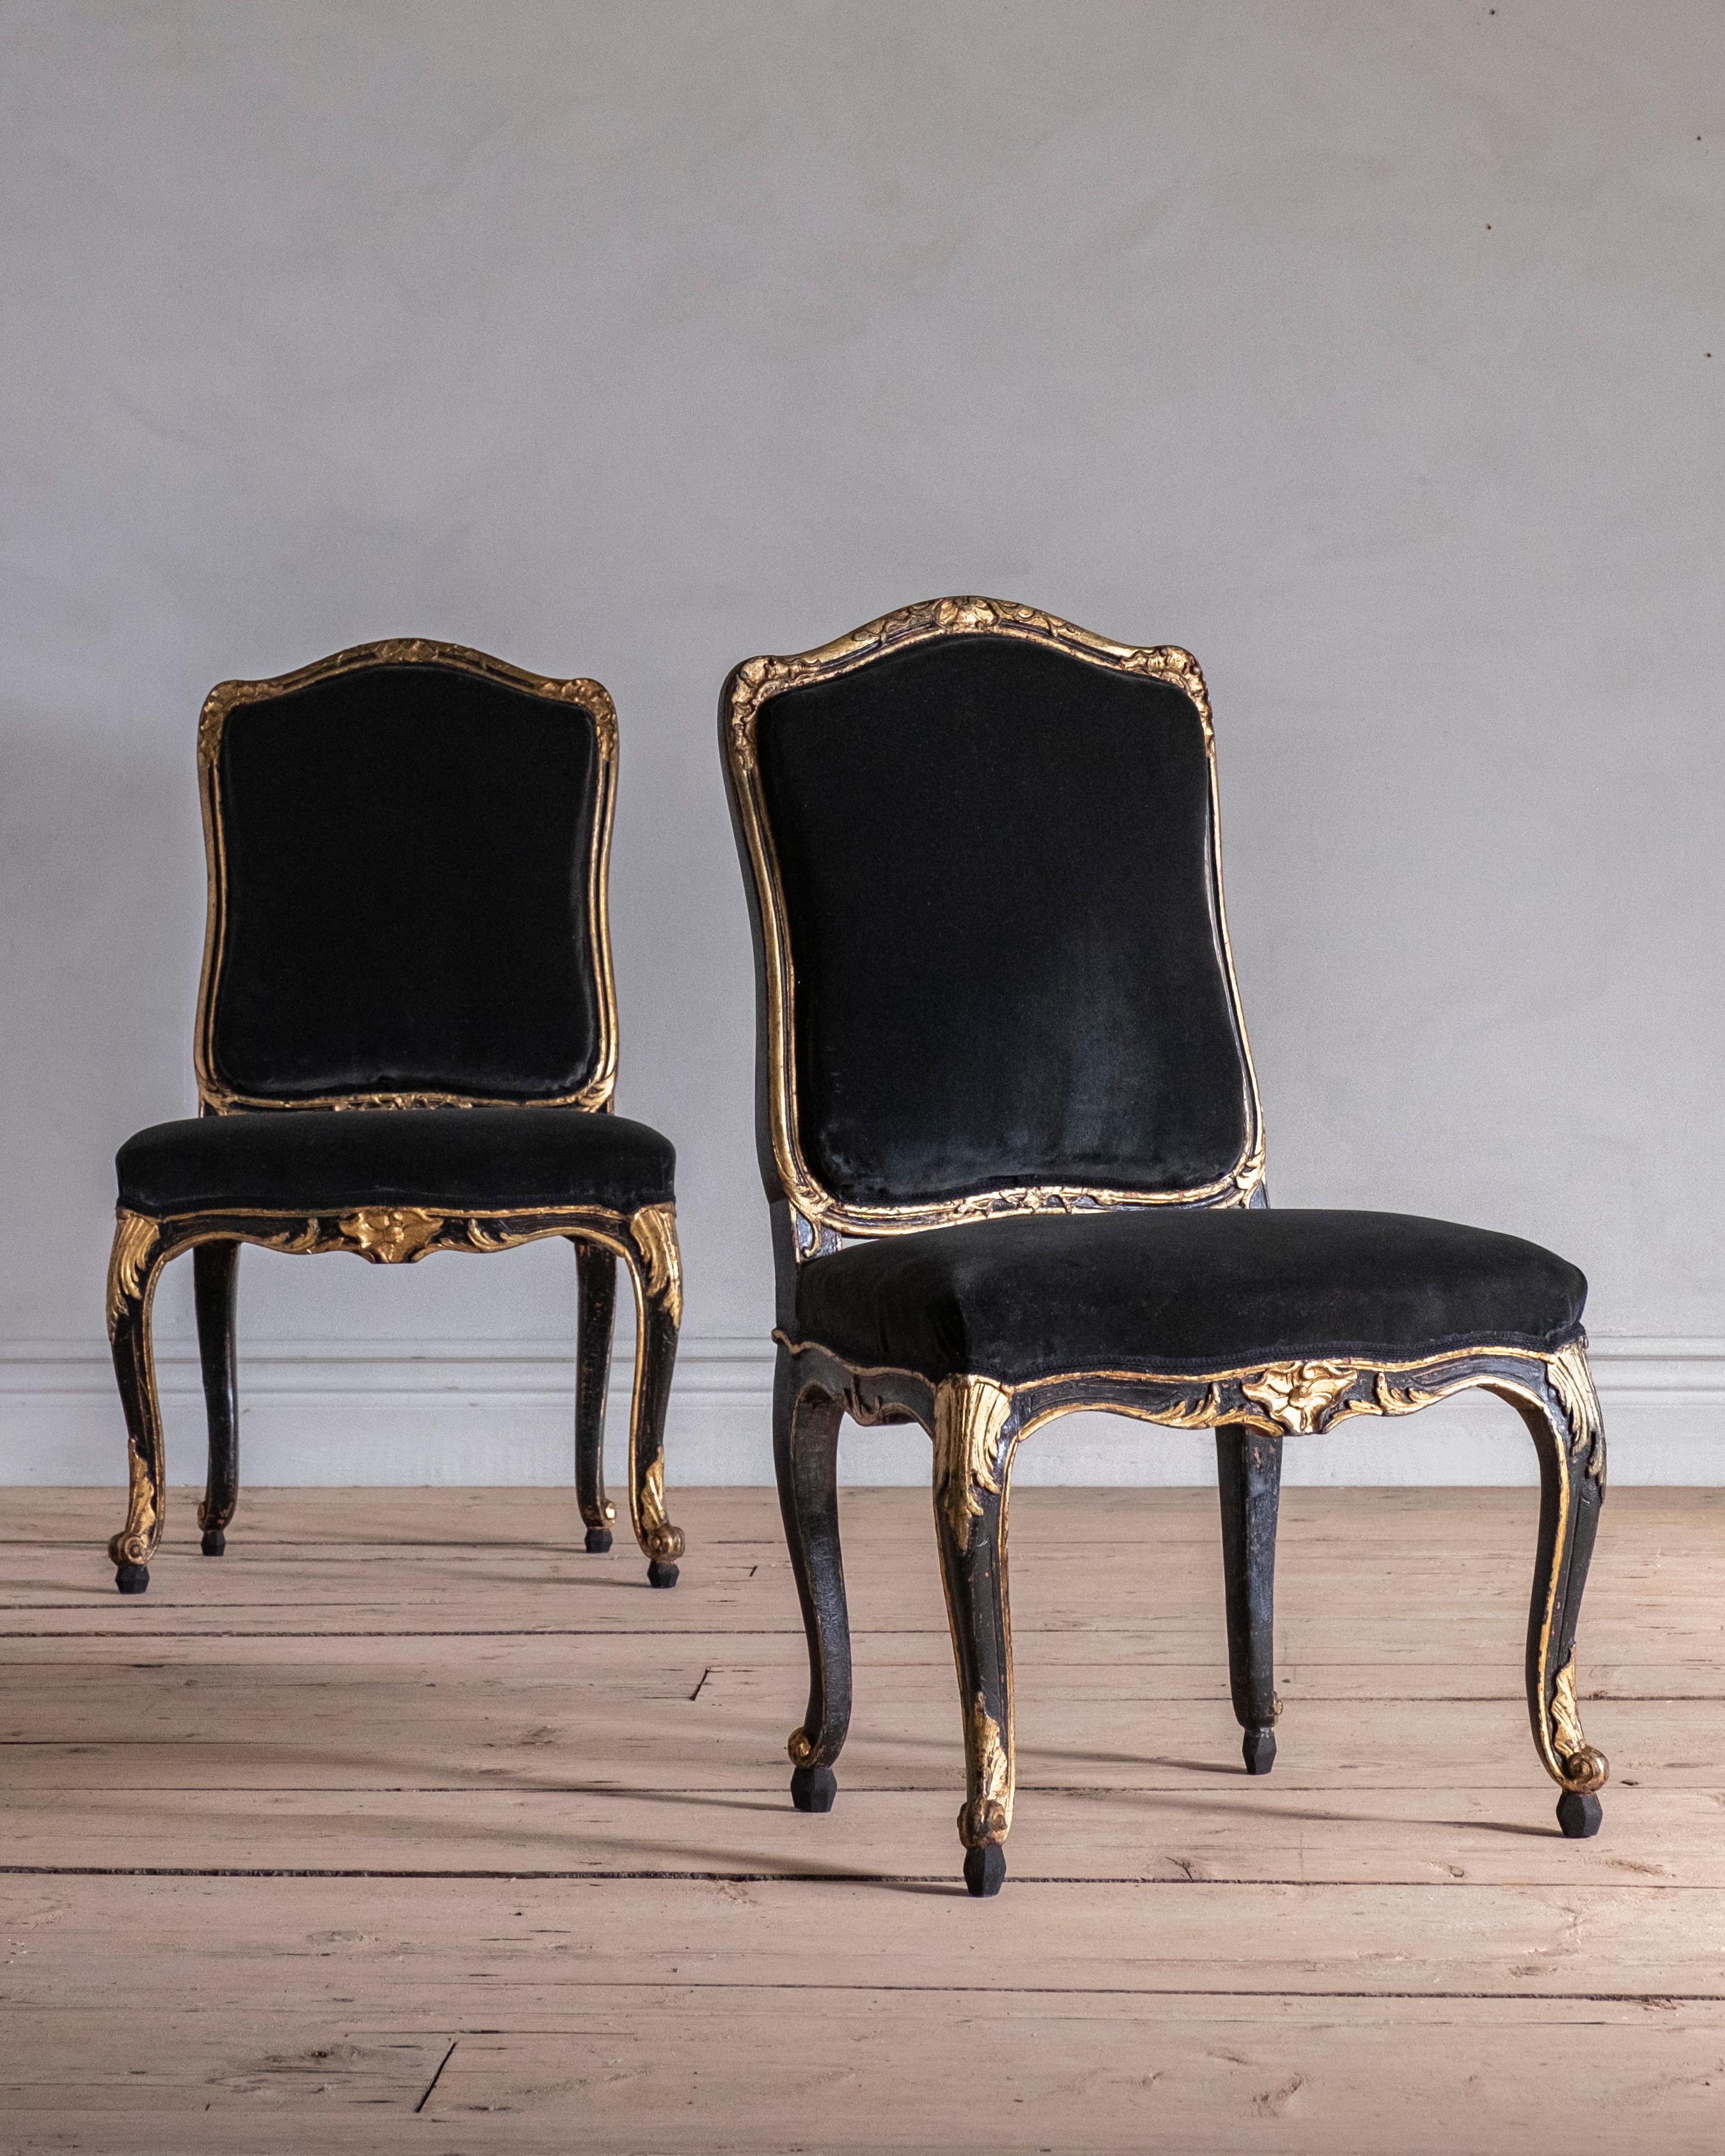 Fine pair of Swedish 18th century chairs in good proportions and shape, circa 1760. Good condition and historically restored, circa 1850 where the black and gold was applied. Newly raised feet. Wear and tear consistent with age and use.